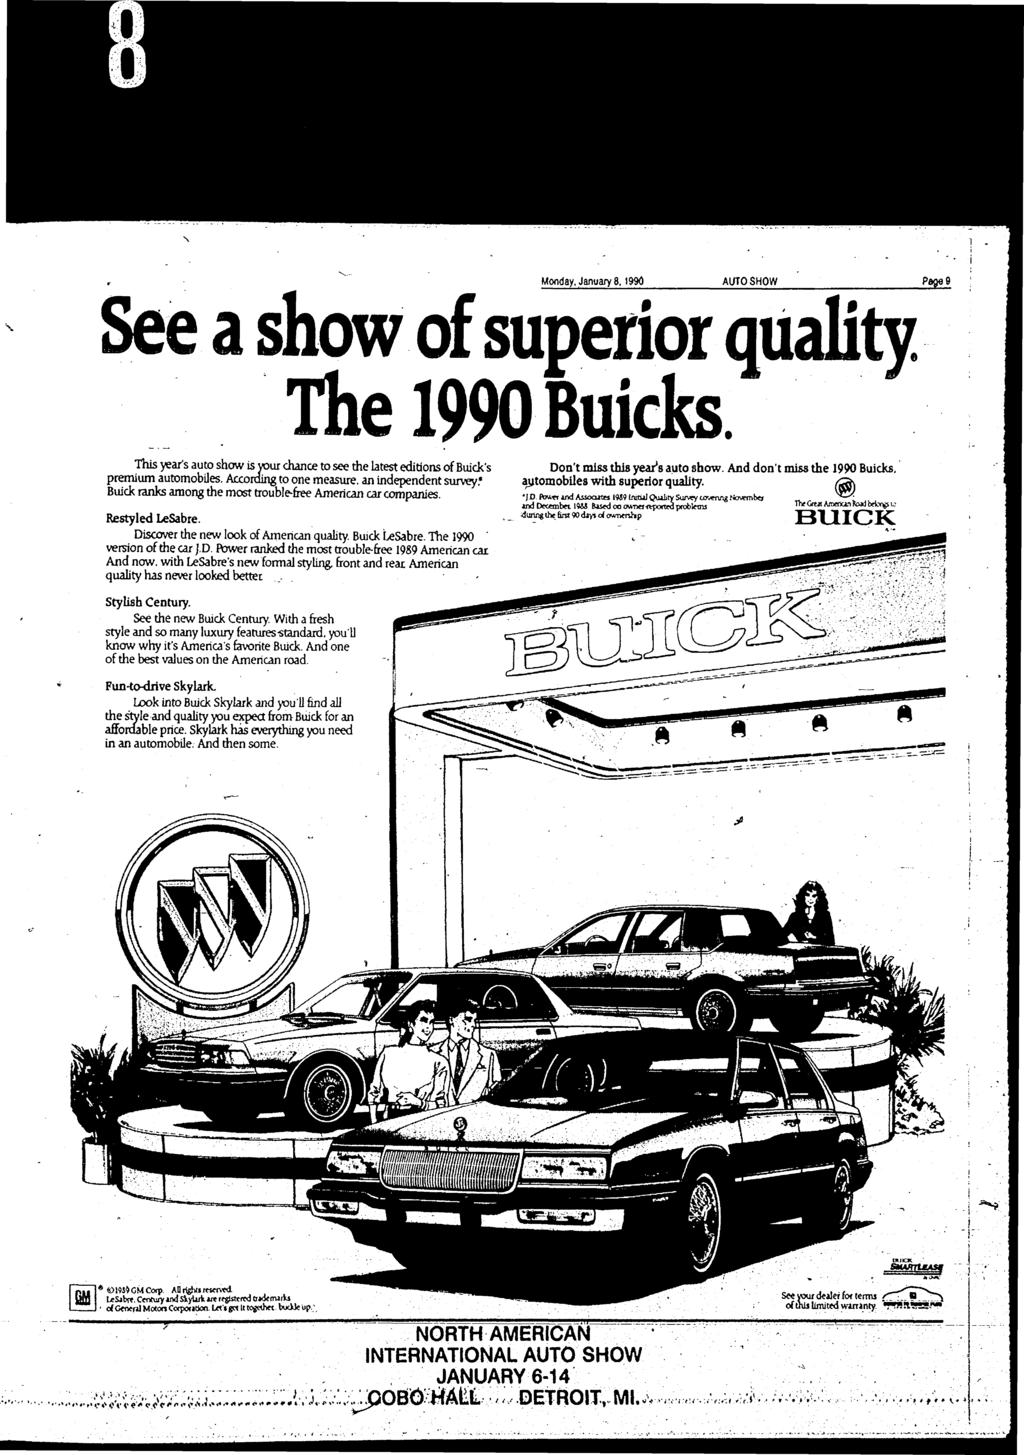 Monday, January 8.990 AUTO SHOW See a show of superor qualty. The 990 Bucks. Ths years auto show s your chance to see the latest edtons of Bucks premum automobles.